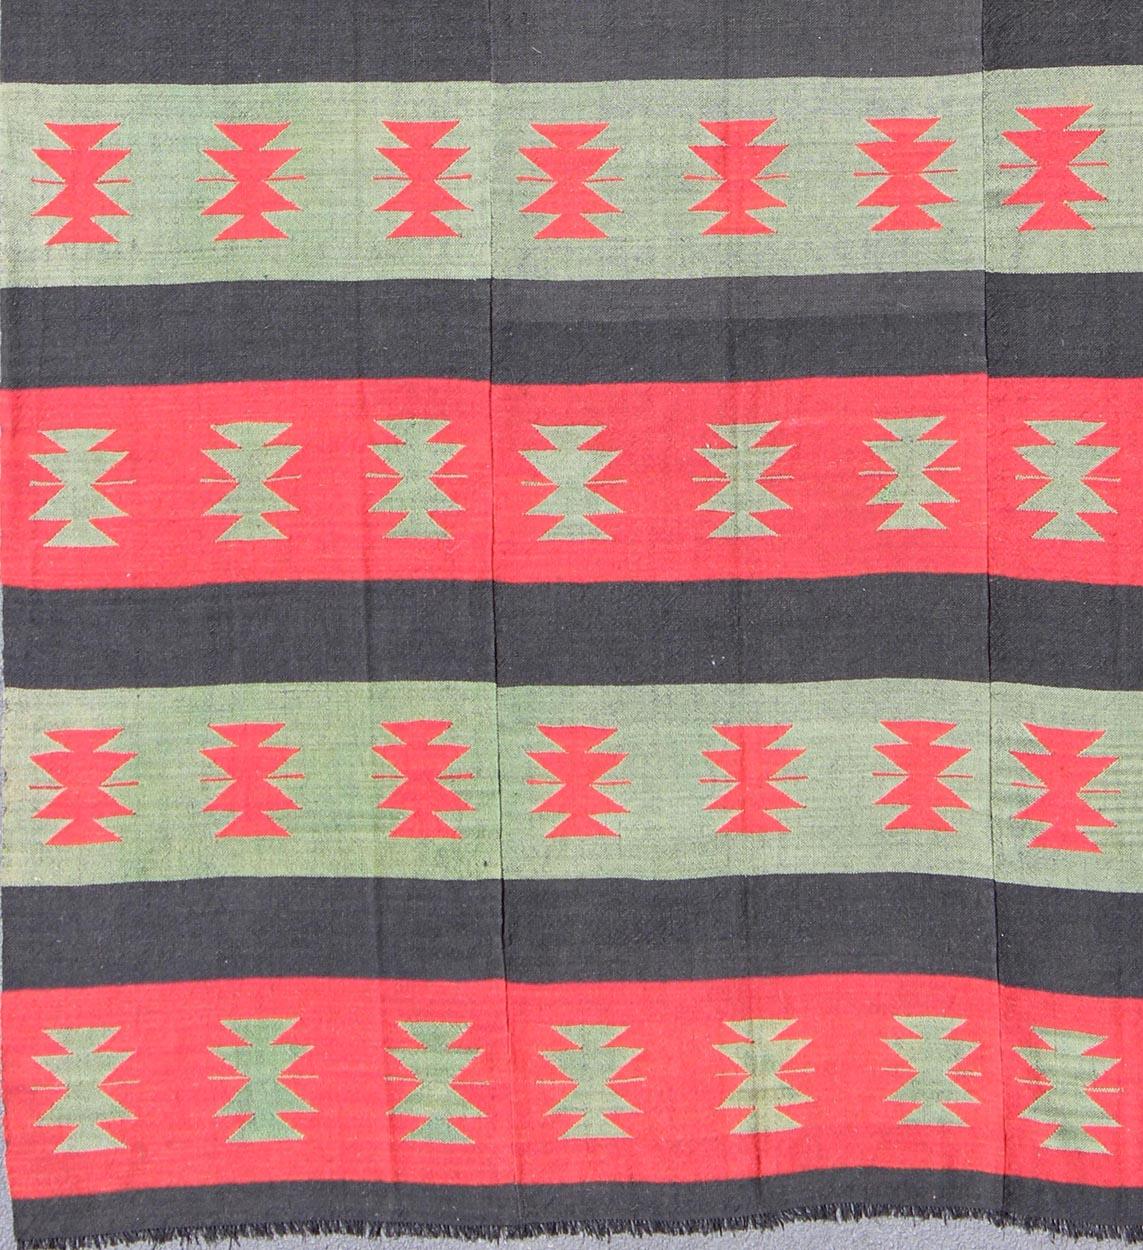 Vintage Turkish Kilim rug with tribal shapes and horizontal stripes in red and green, rug emd-3428, country of origin / type: Turkey / Kilim, circa mid-20th century.

Featuring tribal shapes rendered in a repeating horizontal stripe design, this